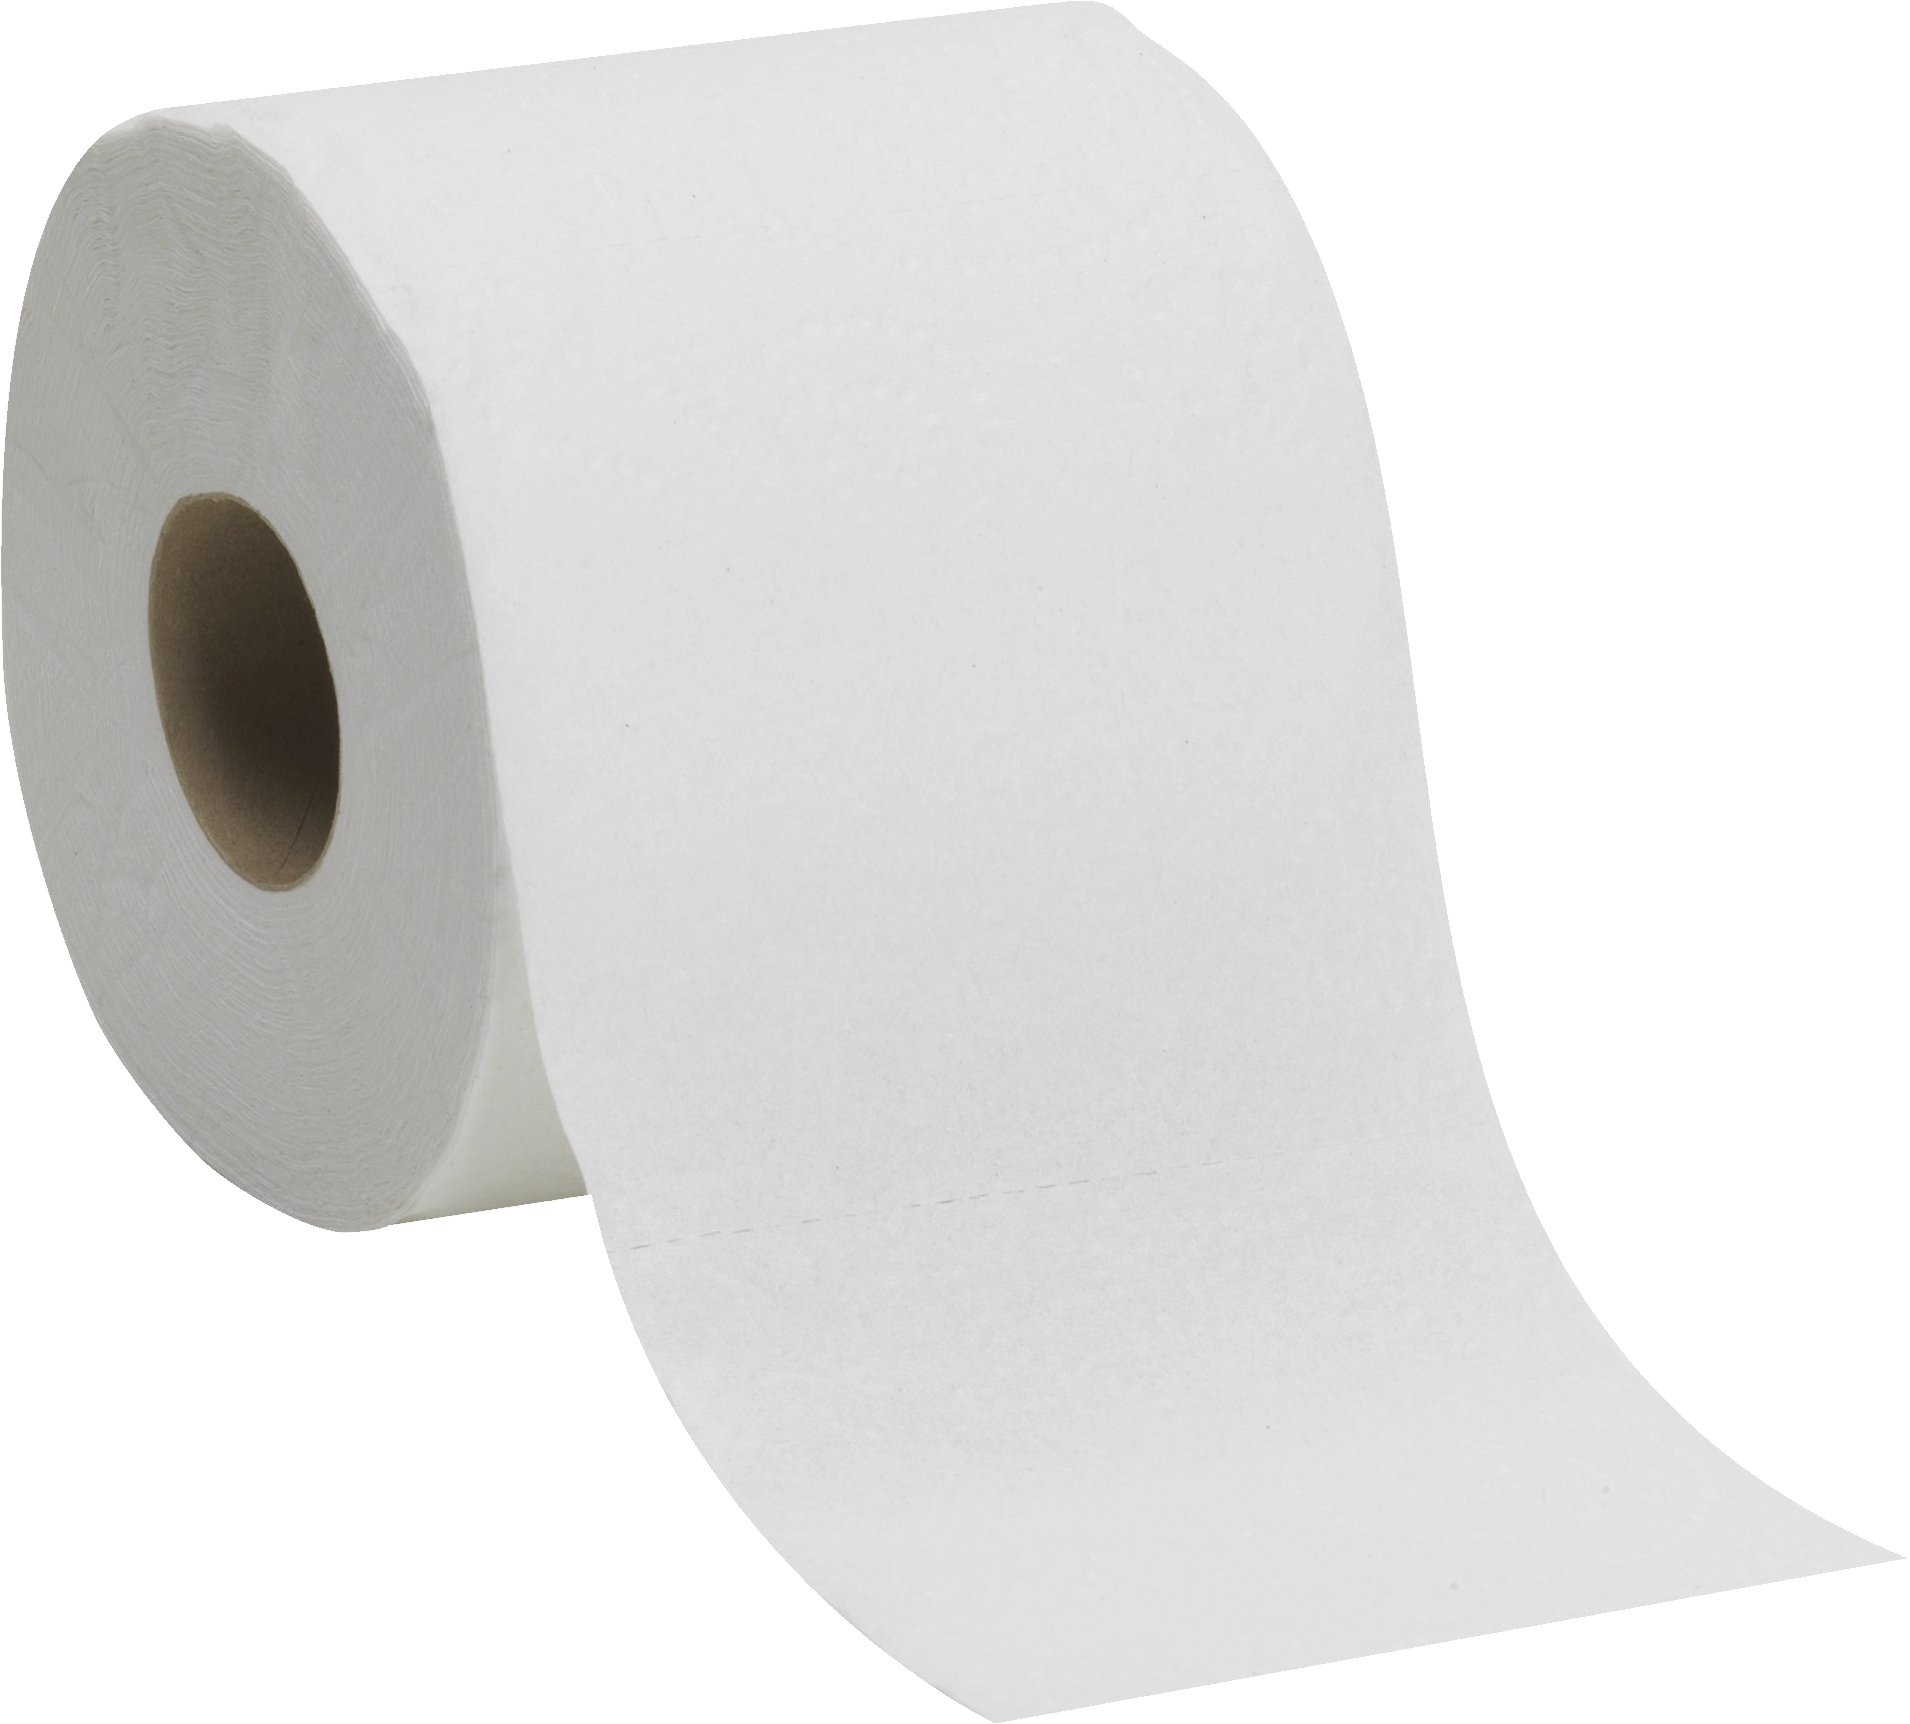 Toilet Paper HD Image Free PNG PNG Image